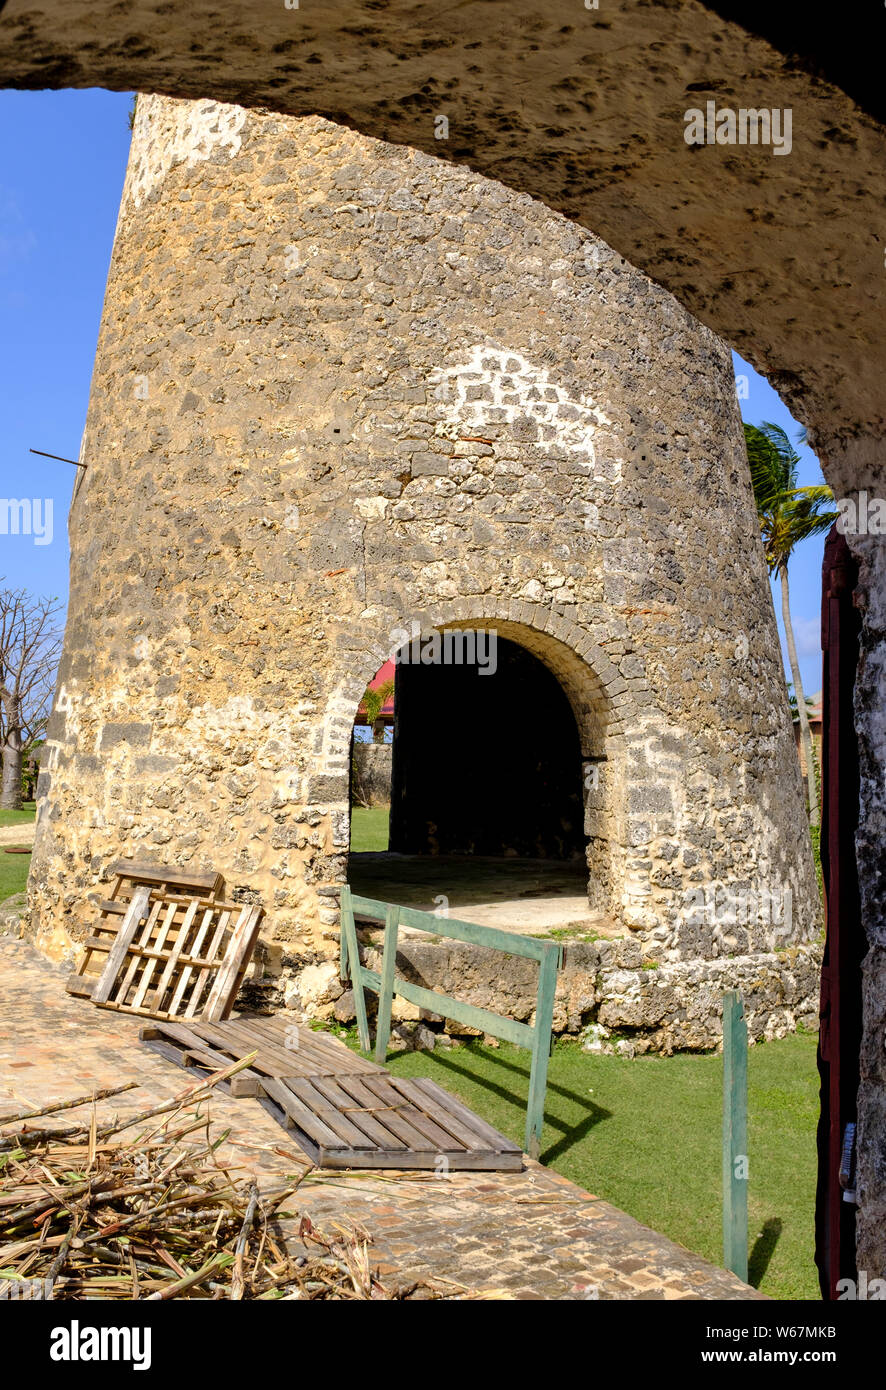 The ruins of a windmill, at St Nicholas Abbey, an artisanal rum distillery in the highland region of Barbados, in the Caribbean Stock Photo